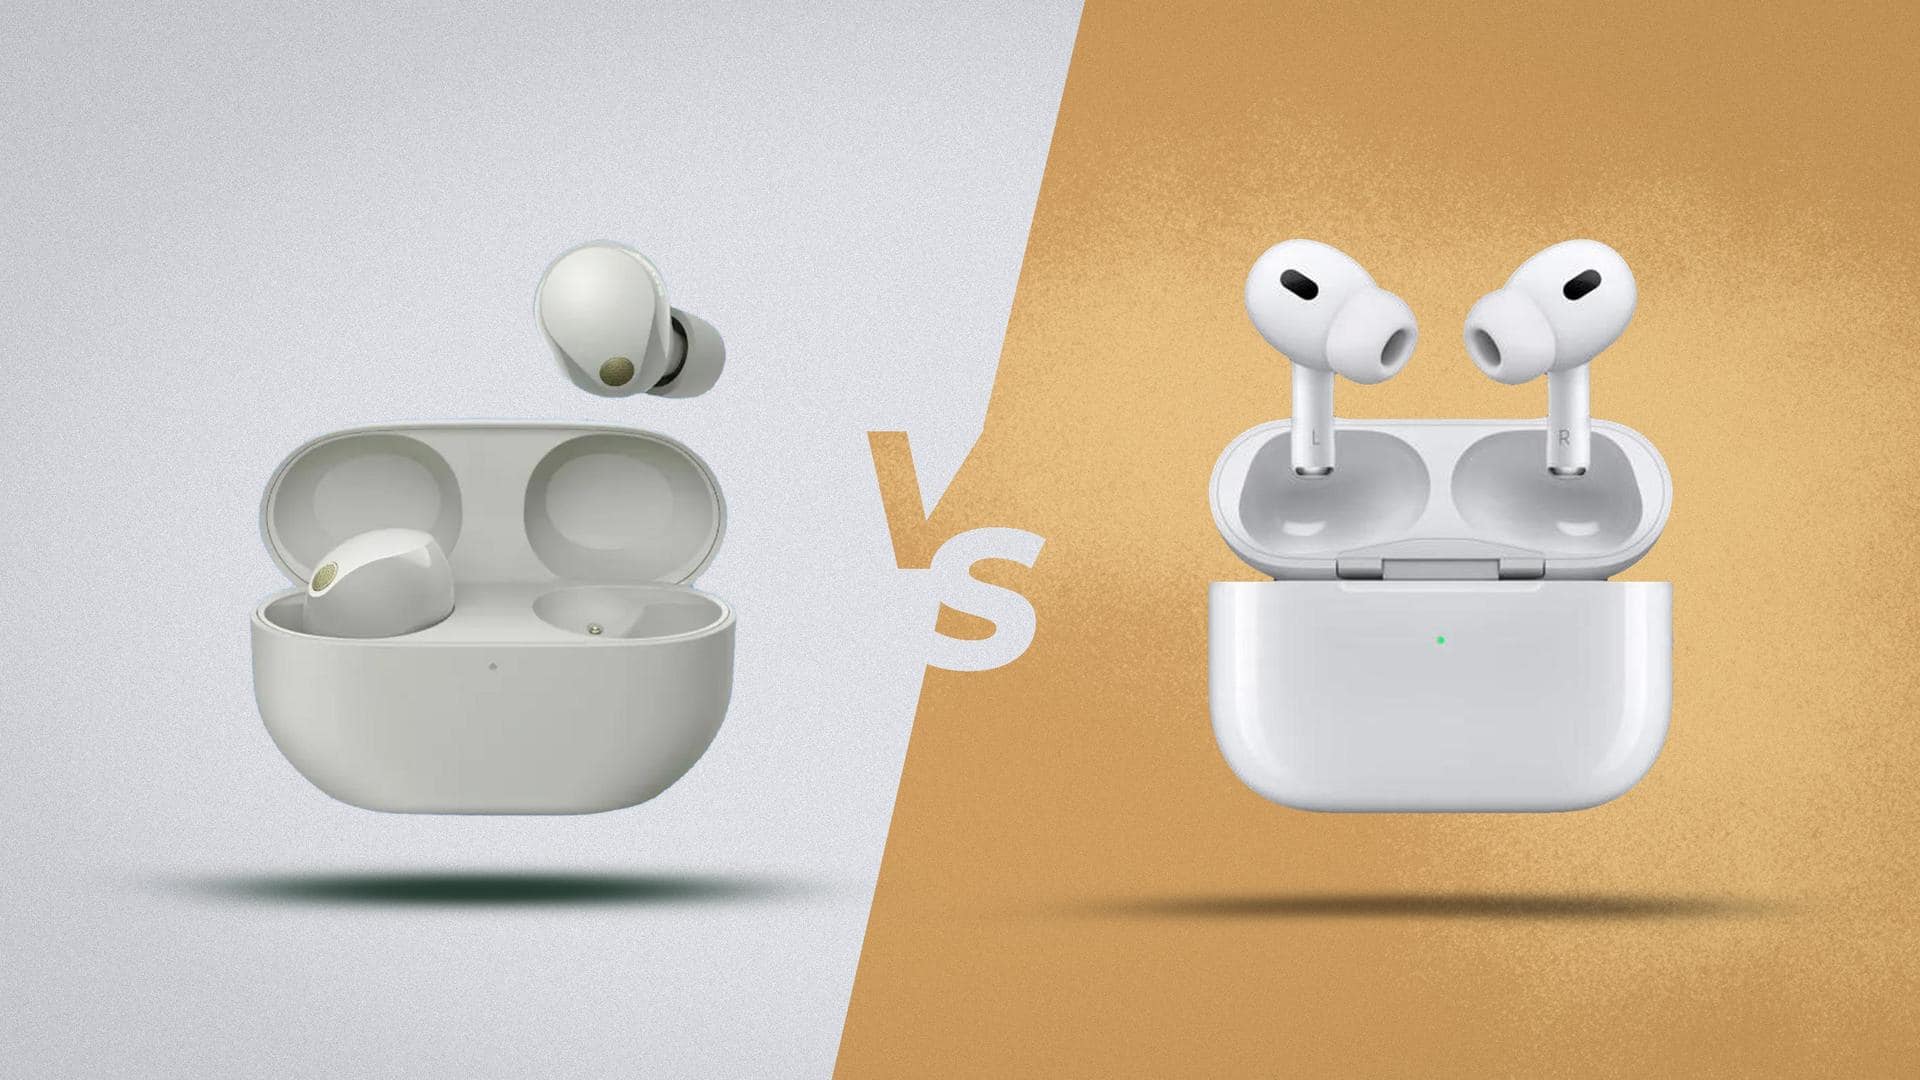 Sony WF-1000XM5 v/s Apple AirPods Pro (2nd-gen): Which is better